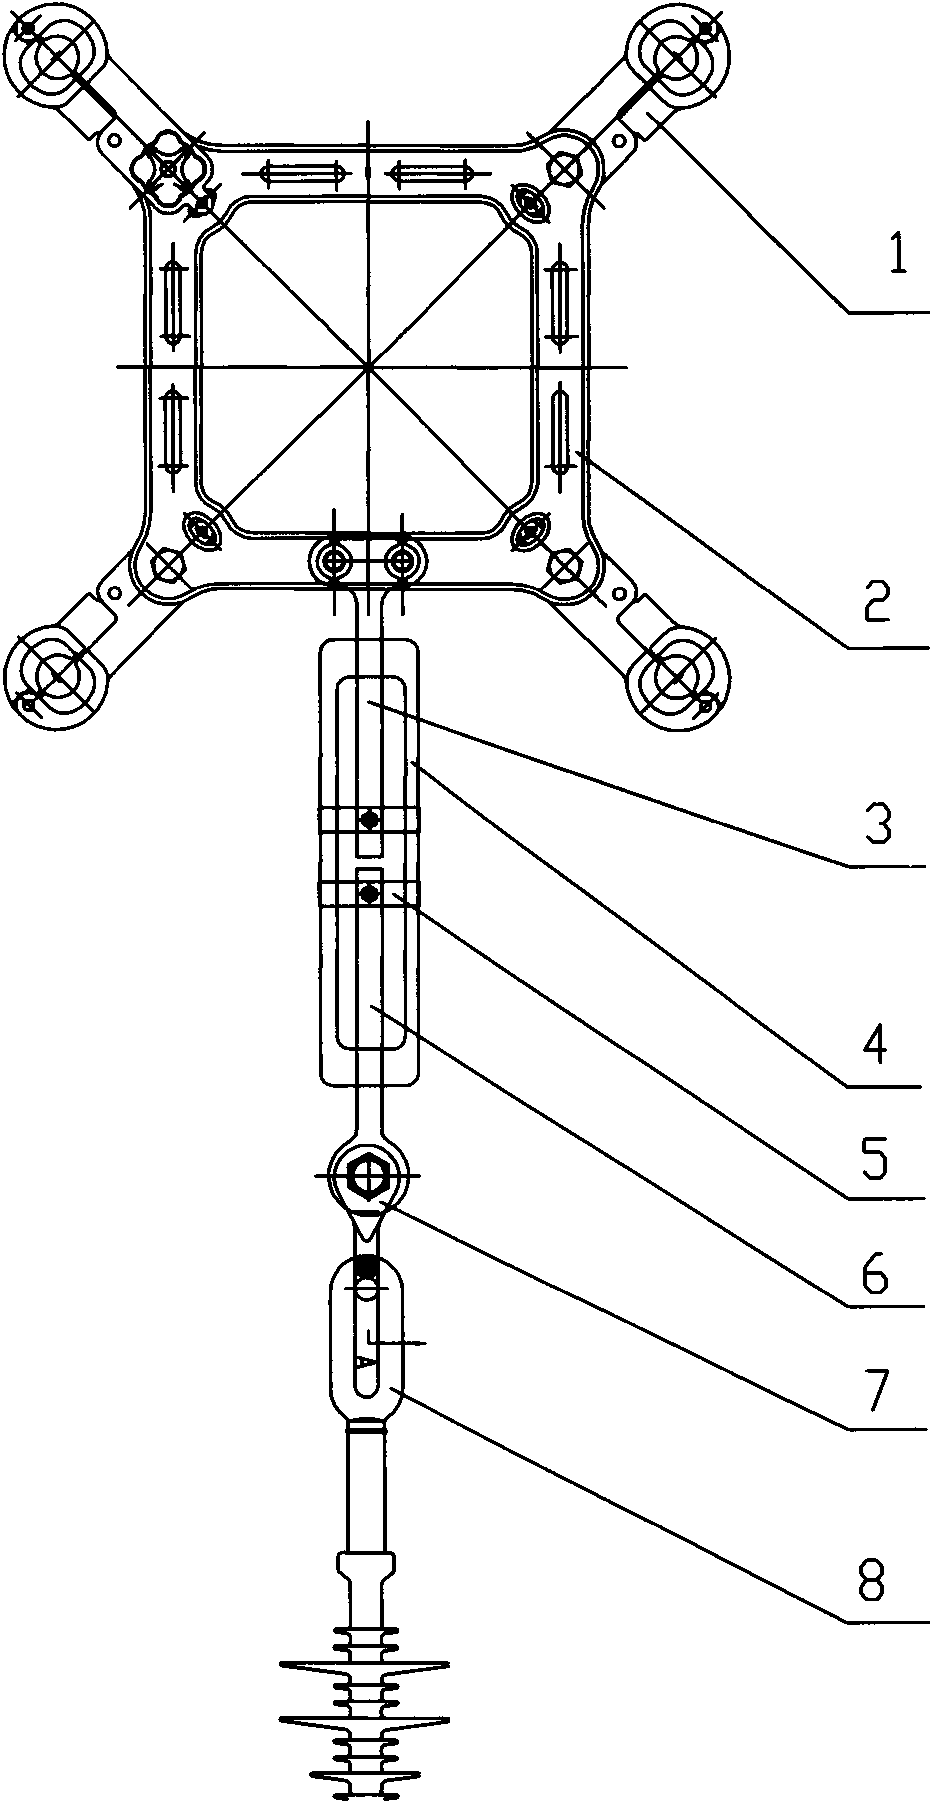 Turn buckle typed steplessly adjustable phase-to-phase spacer bracket